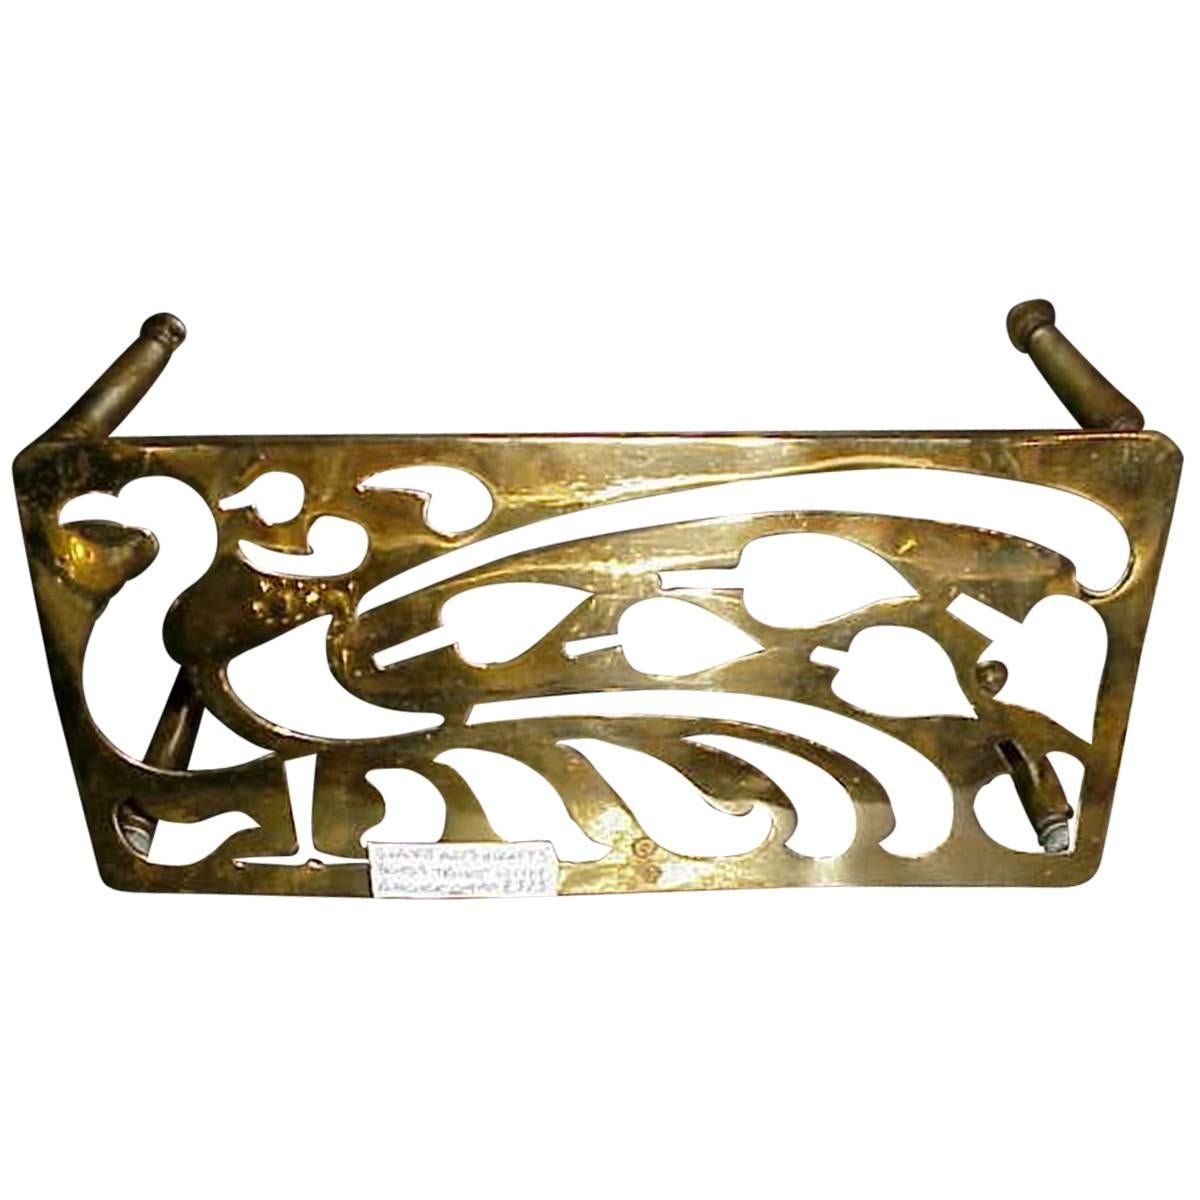 An Aesthetic Movement Brass Trivet with Peacock Fret Work, on Turned Legs